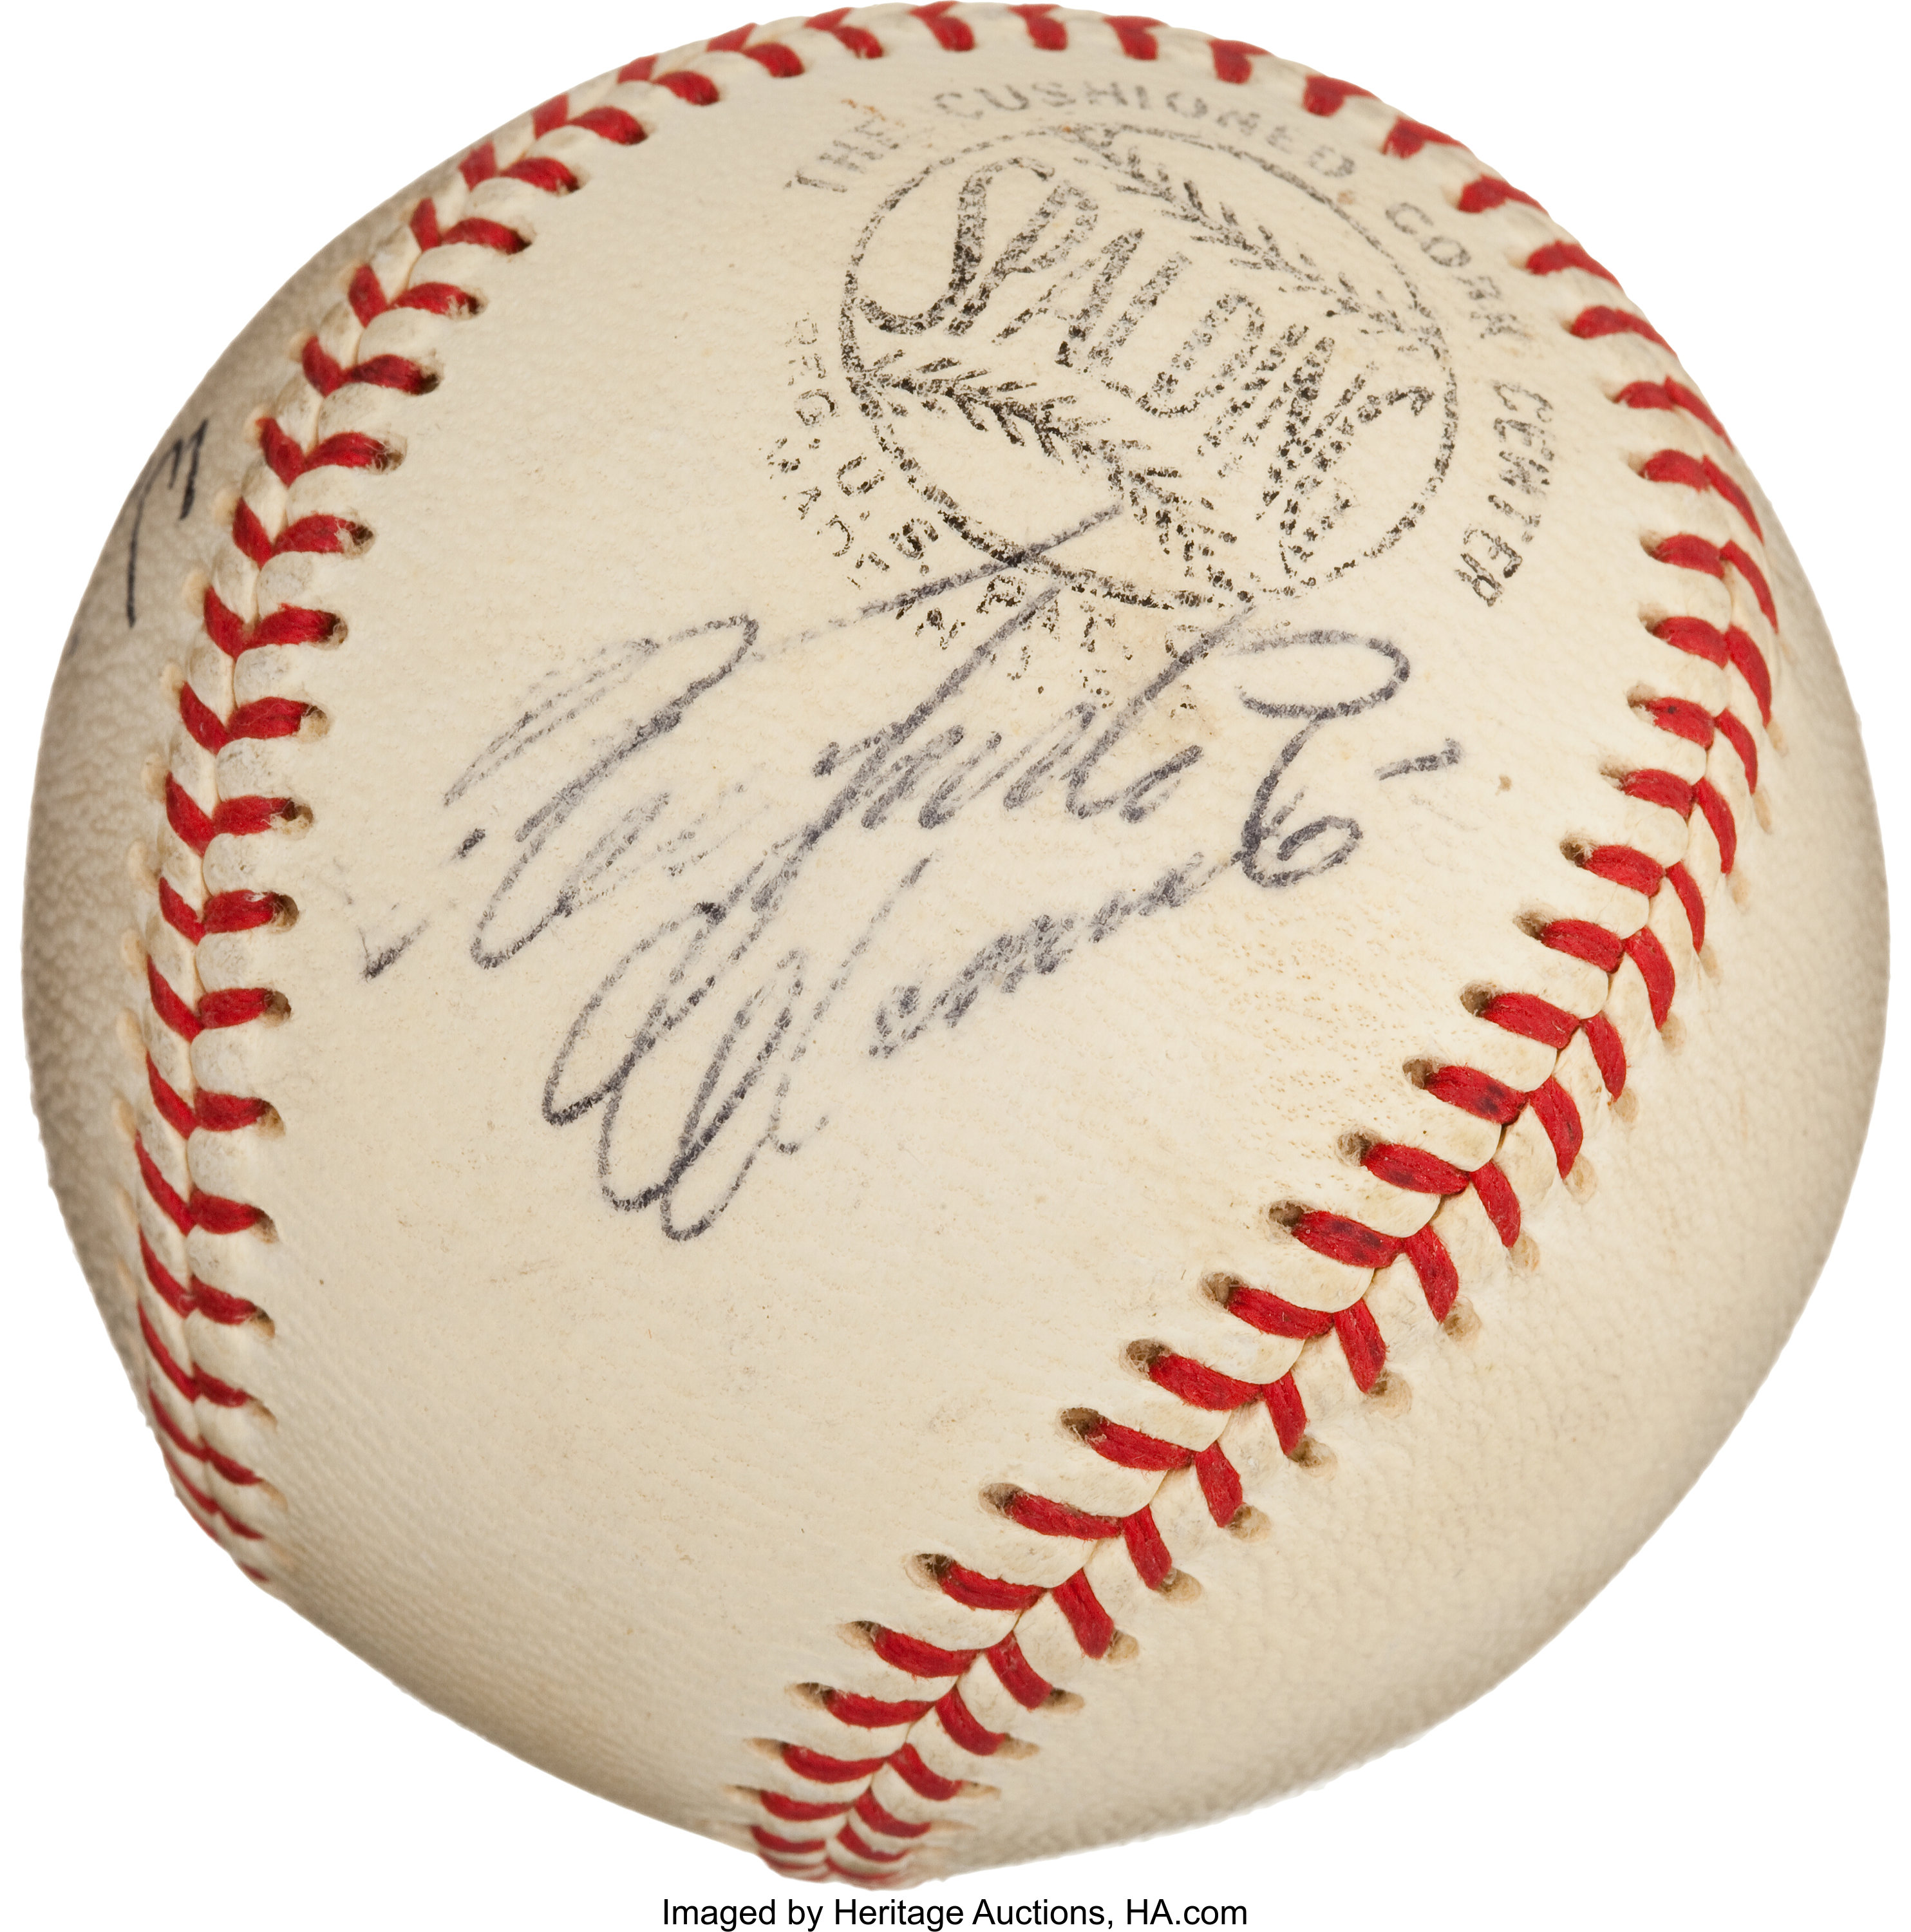 Willie Stargell Original Sports Autographed Items for sale